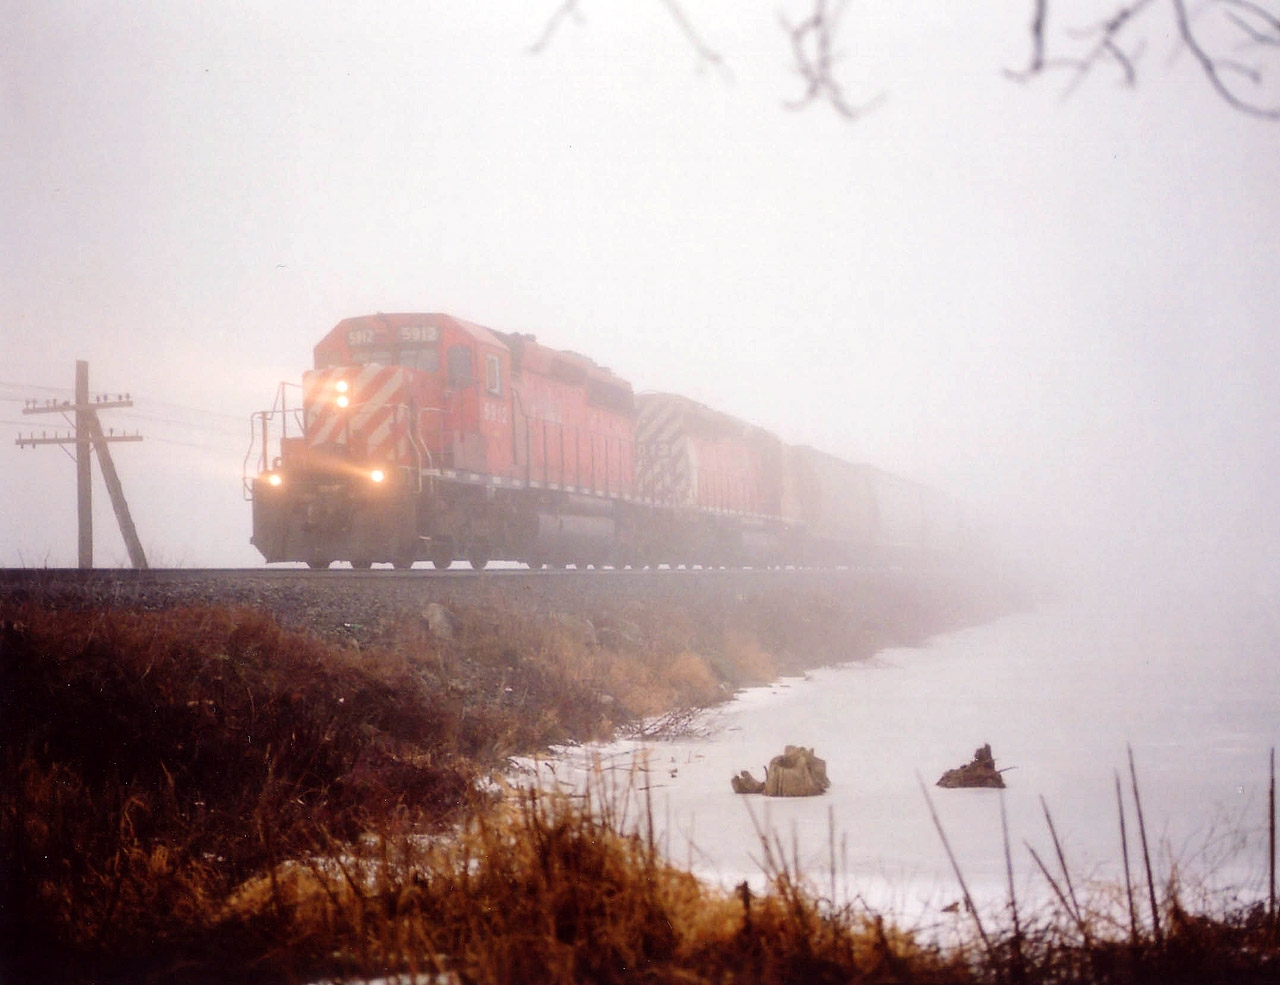 Just one of those days in which I wanted to go out no matter how crappy the weather. CP was still running 3 westbounds each morning between 0830-1230 and one of them, #441 was habitual with its SD40-2 locomotives for power. My prime target. This, after so many years of being 'tired' of them..........
I parked at the west side of Mountsberg Conservation area and walked down across the frozen stream, past the dam, to the railway where it crosses the reservoir and waited it out at the waters' edge. I have minimum 10 minutes warning usually when trains call Guelph Jct for permission west. This is a great location in good weather, but it IS an area in which an entrance fee is charged. NOT advisable to walk in from the closest sideroad. Anyway, out of the fog comes CP 5912, 6013 as #441 west. I've got a image with some mood to it, and am satisfied. Not long after this, #441 was abolished. Now, it is hit and miss to see anything along here, as most of the local fans know.